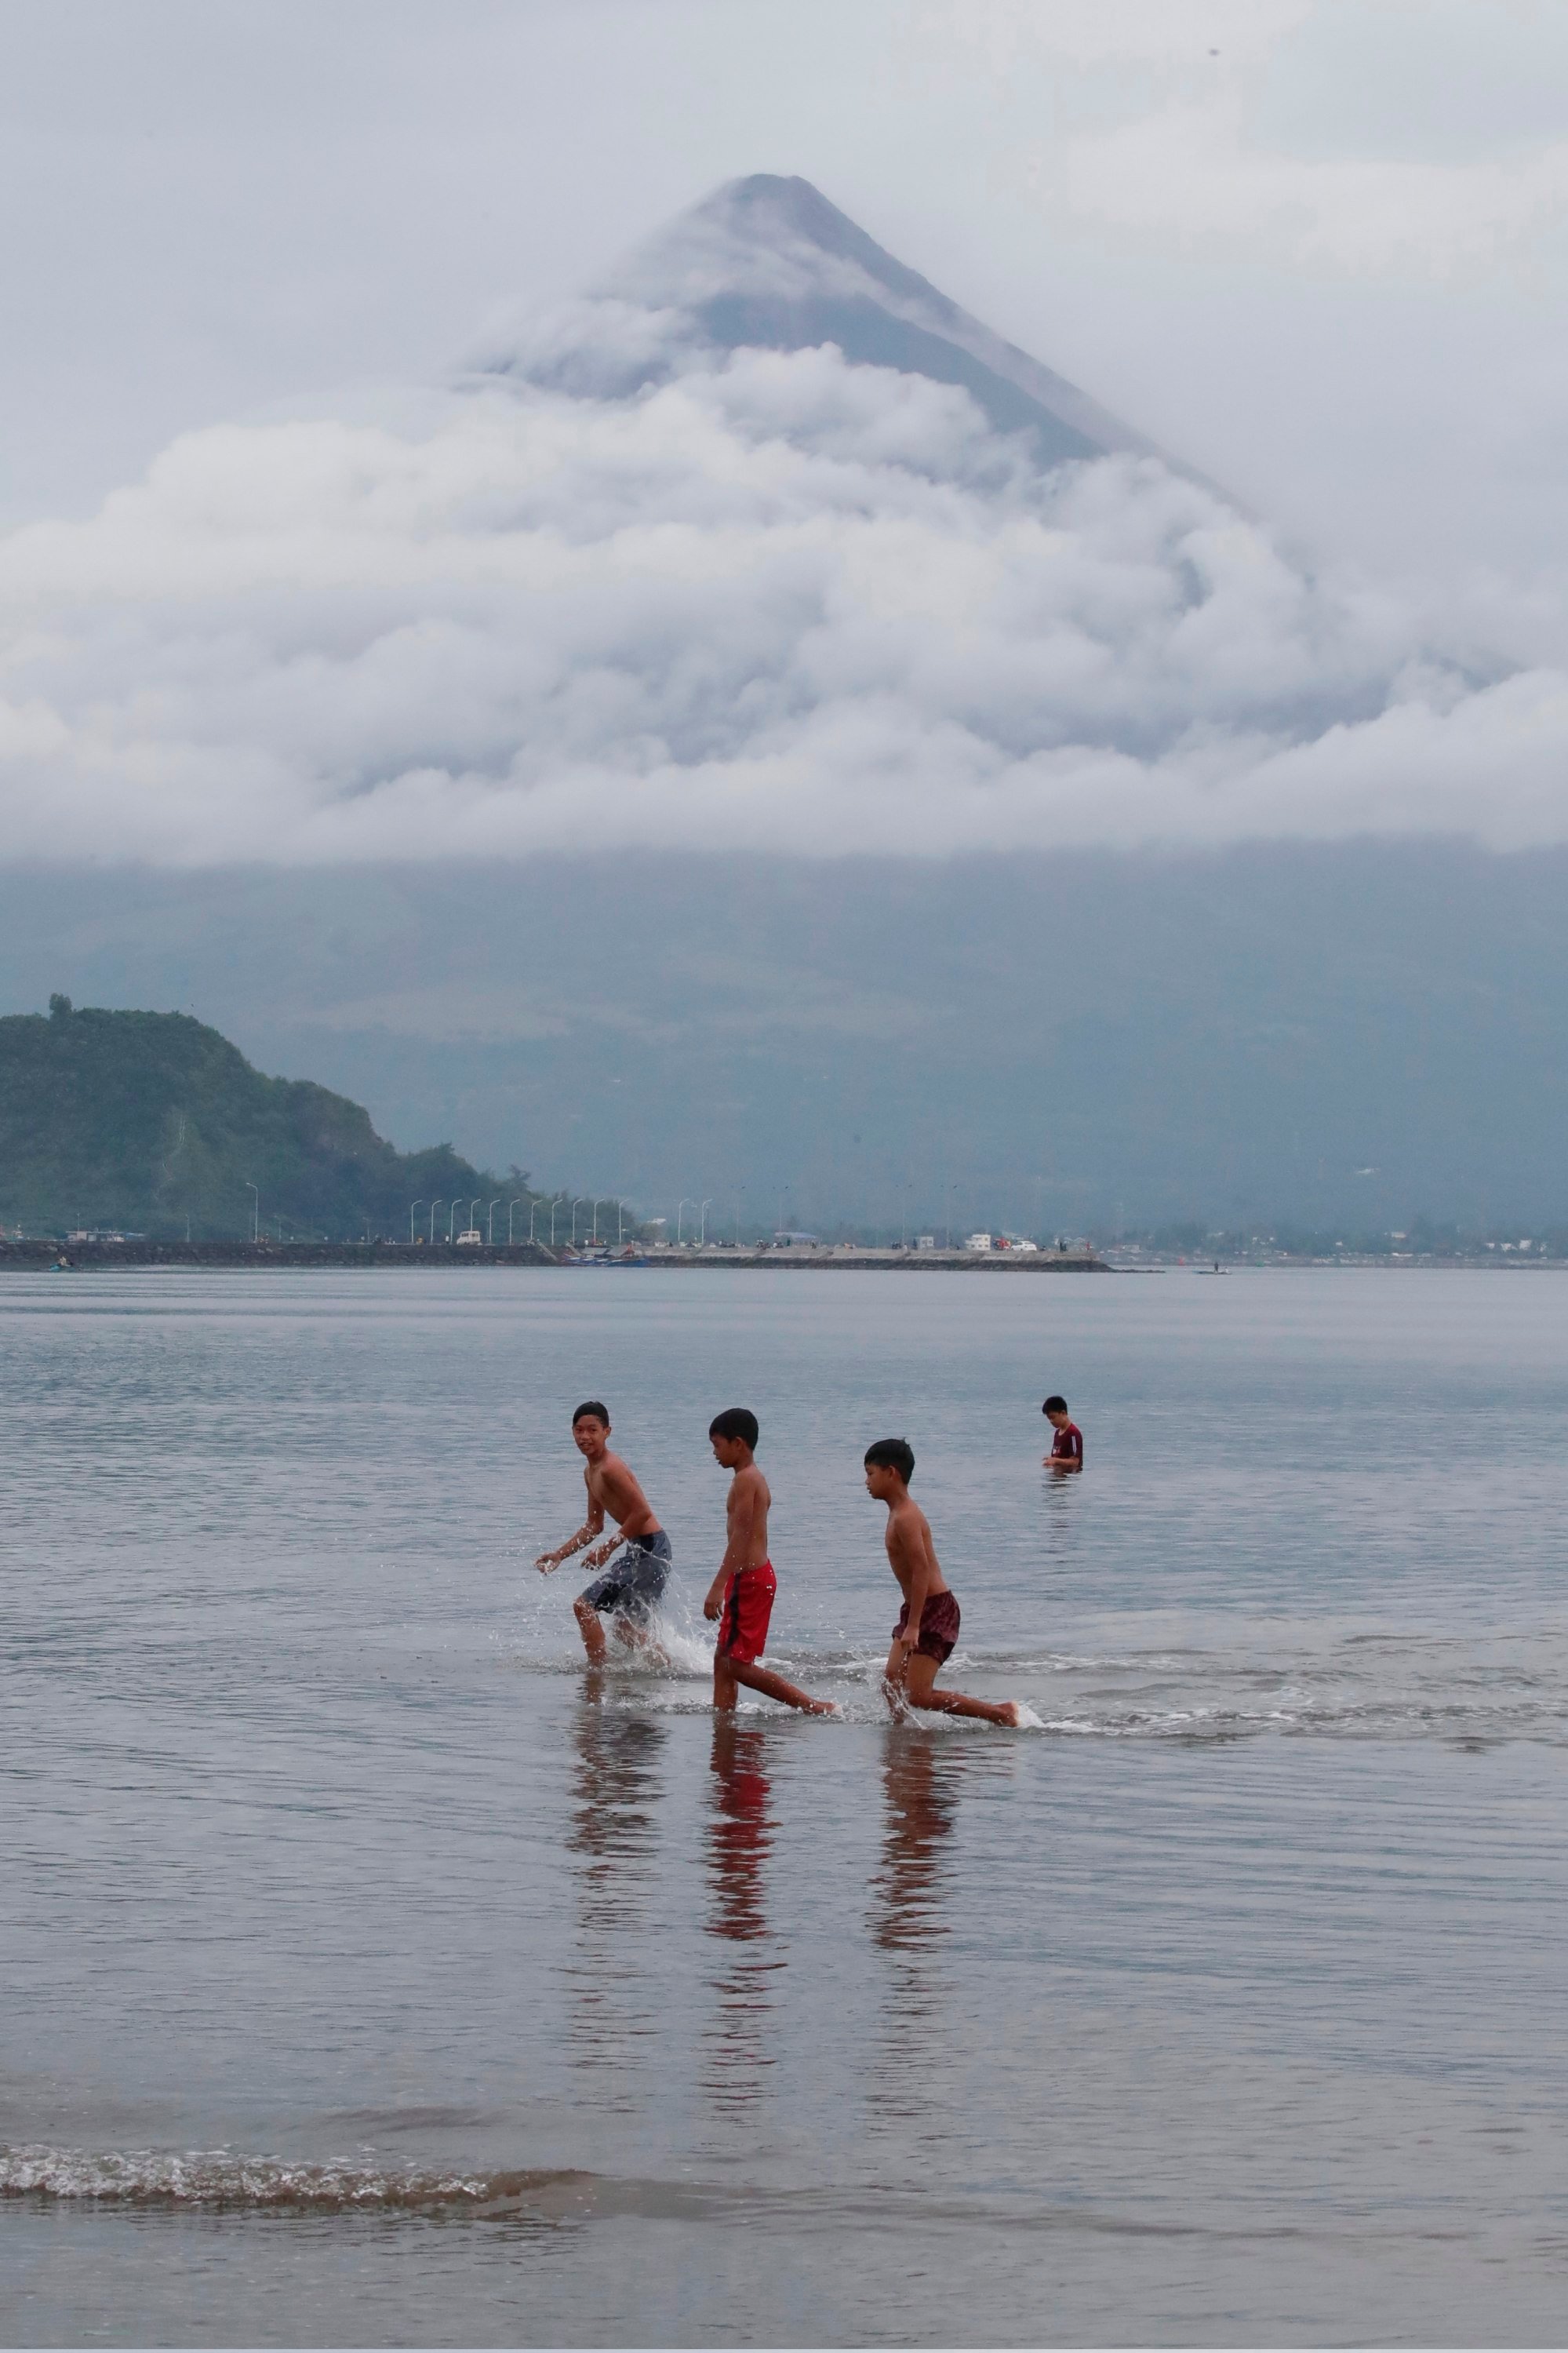 Filipino children frolic in a lake in Philippines’ Albay province with the active Mayon volcano in the background. The average Filipino is 156.41cm tall. Photo: EPA-EFE